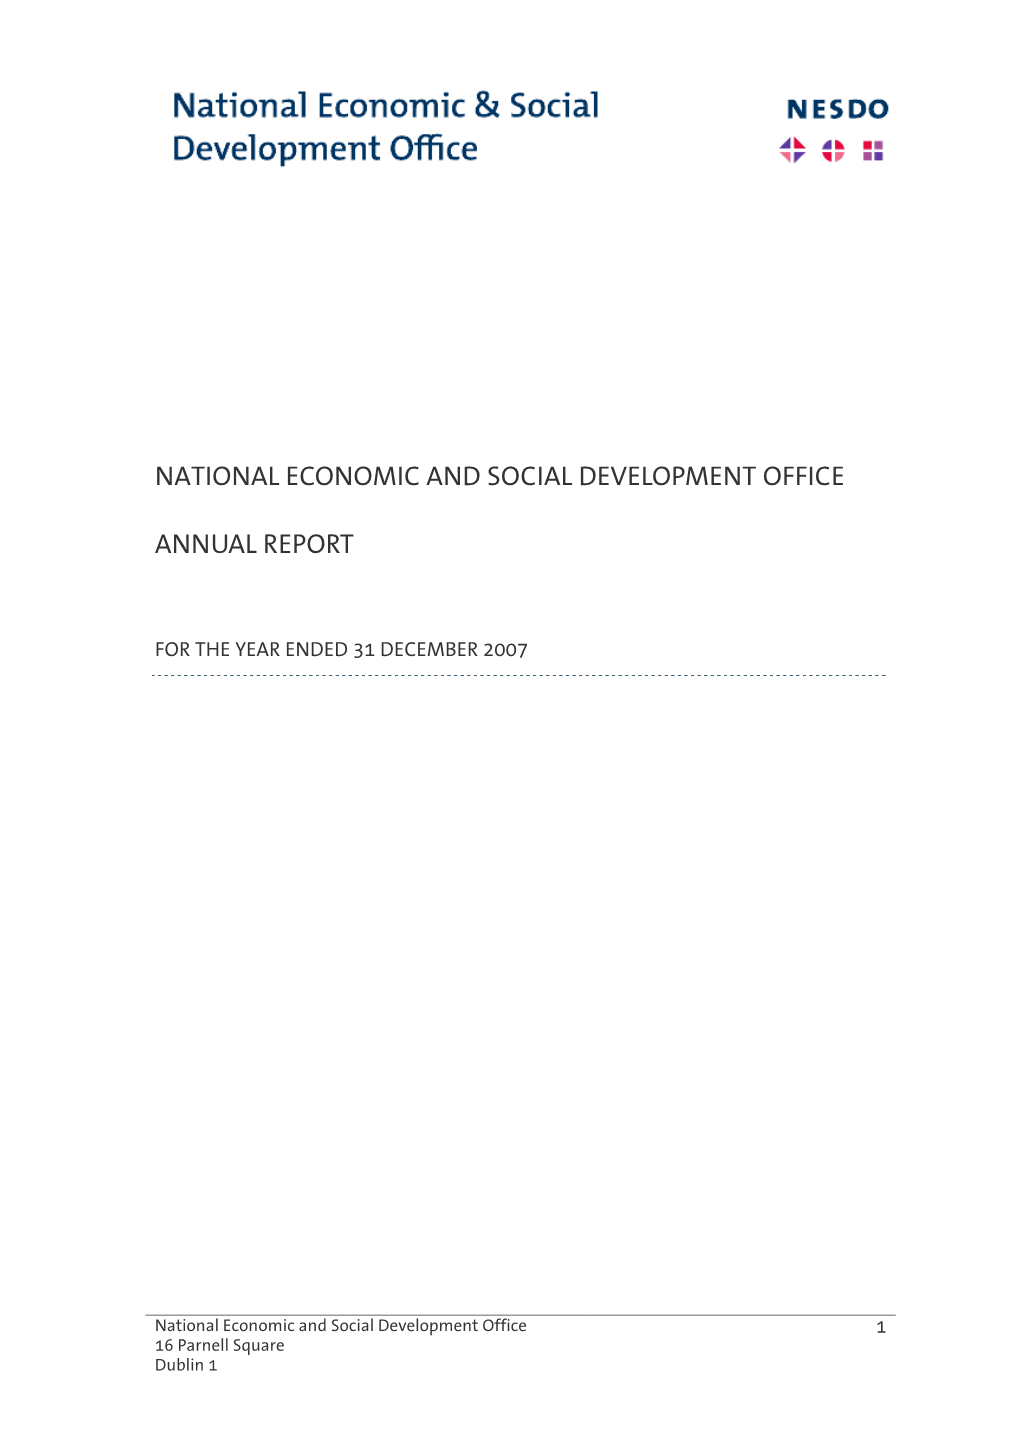 Annual Report Of